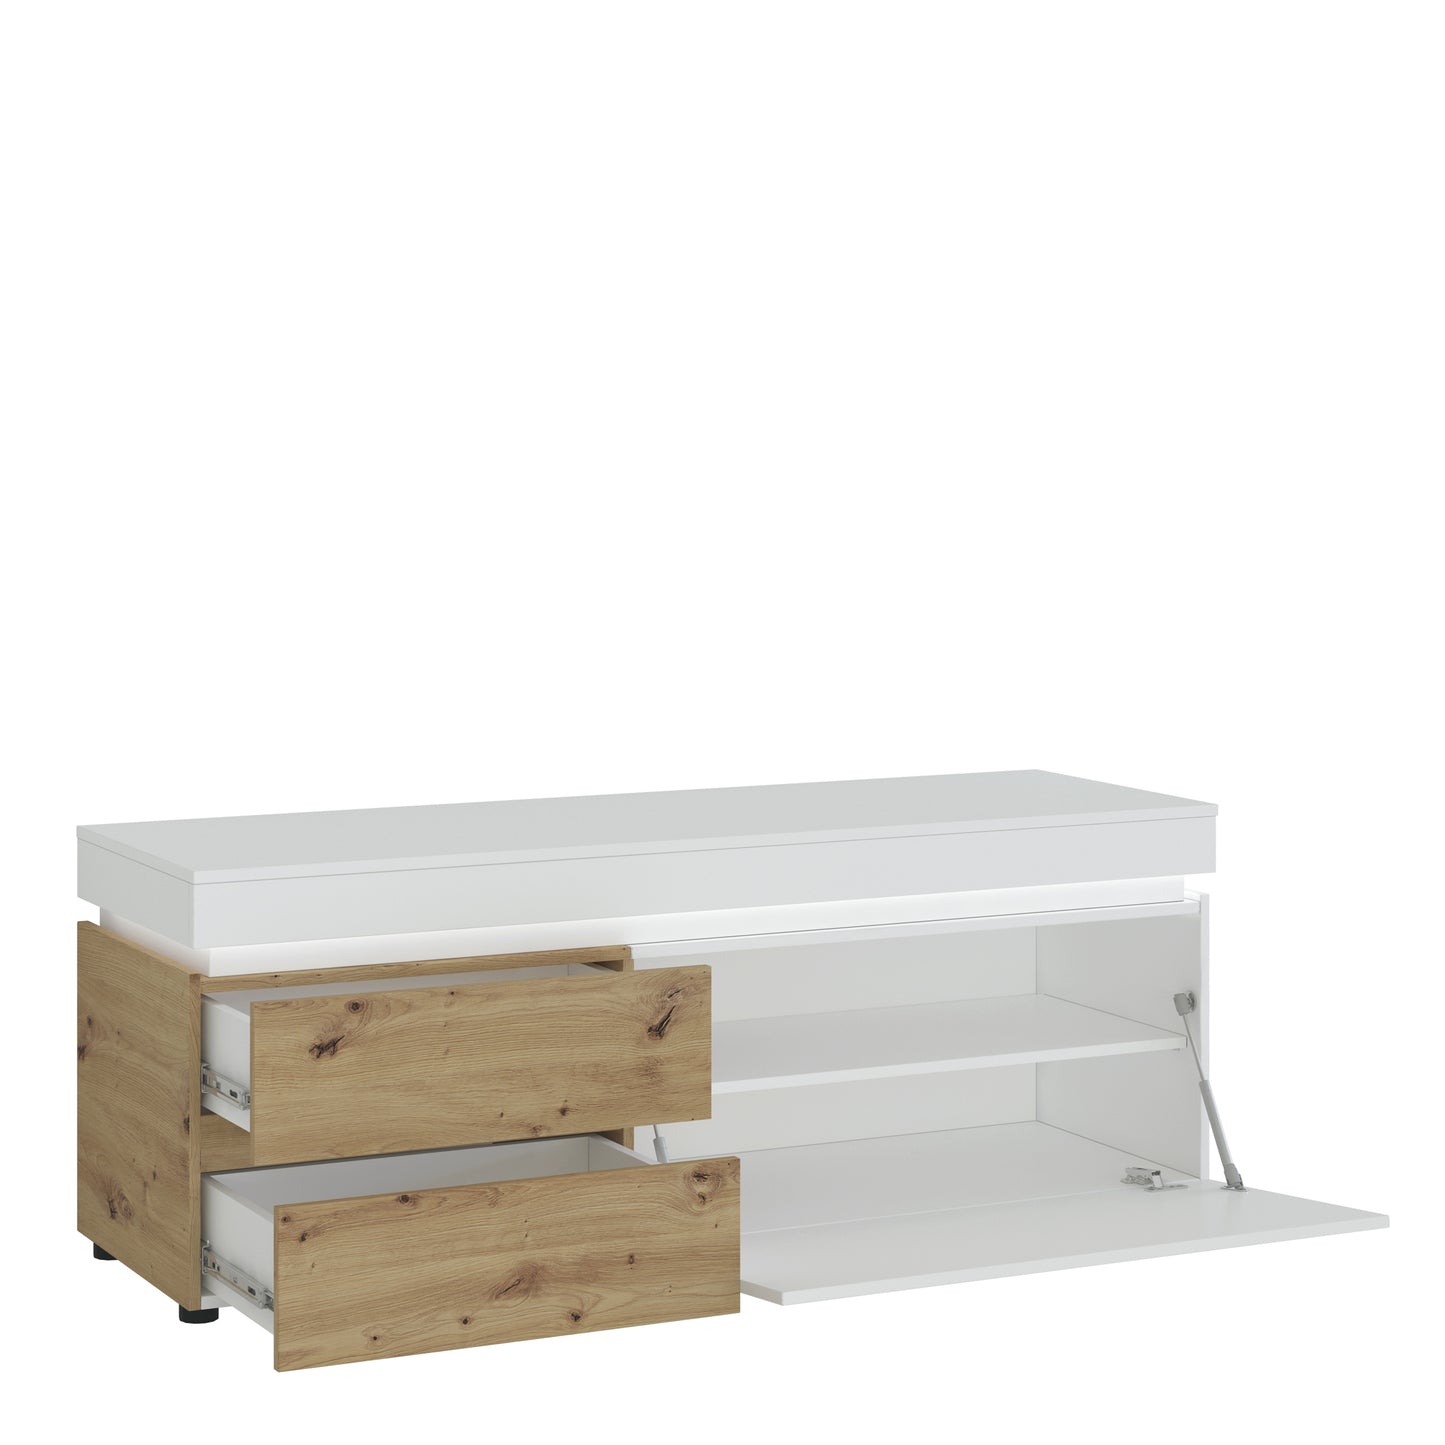 Luci Bright Luci 1 door 2 drawer 150 cm TV unit (including LED lighting) in White and Oak